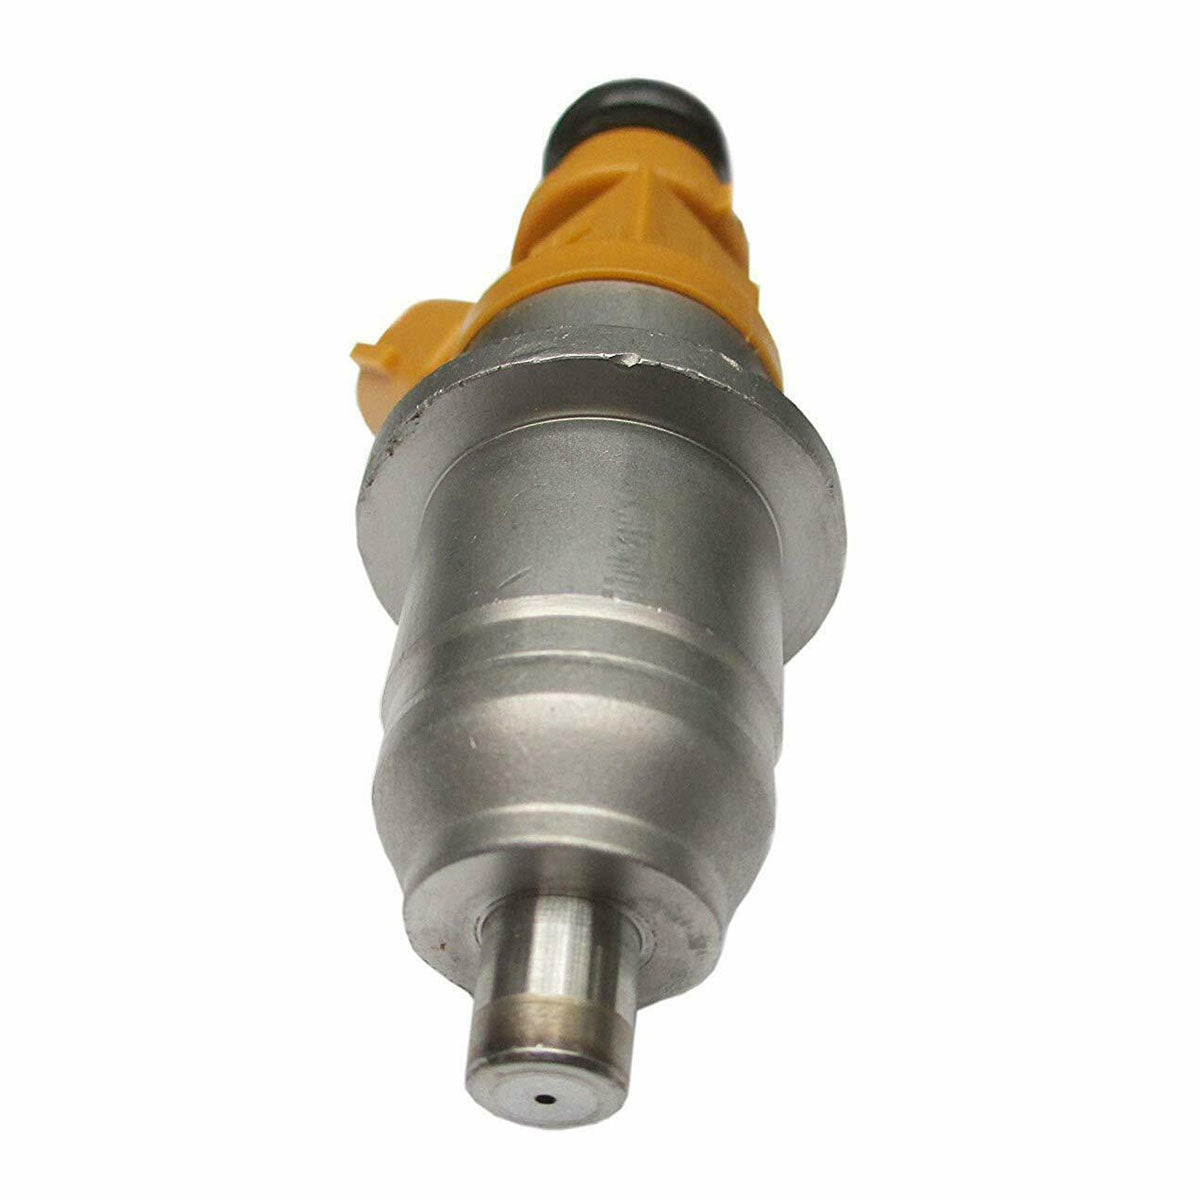 Fuel Injector 60V-13761-00-00, Fuel Injector for 2003-2007 Yamaha, Daysyore Fuel Injector, Car Fuel Injector, Auto Fuel Injector